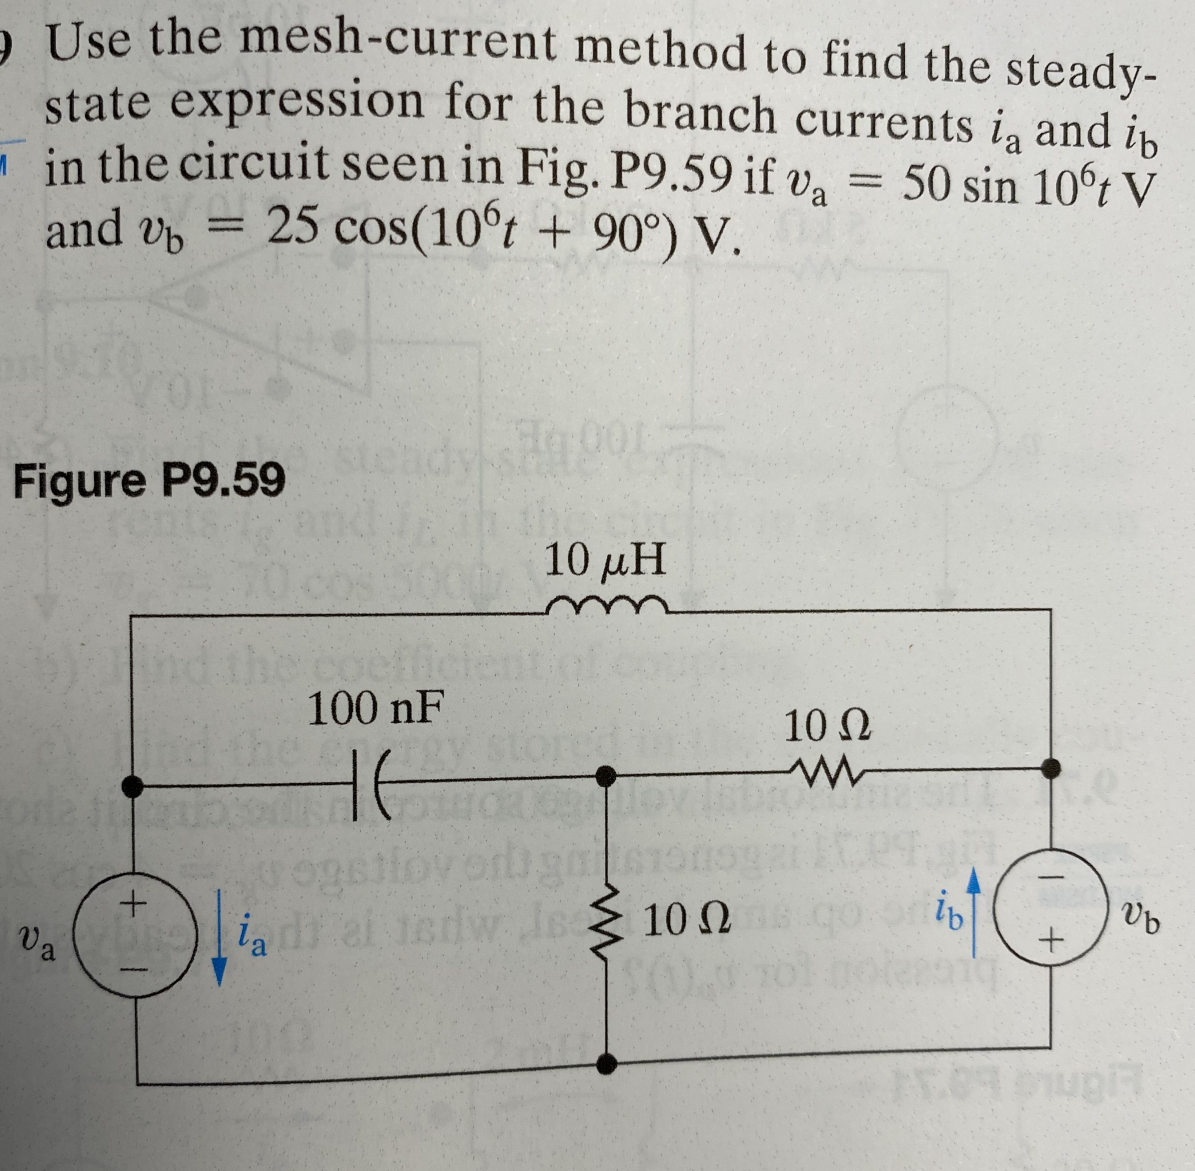 9 Use the mesh-current
method to find the steady-
state expression for the branch currents in and in
in the circuit seen in Fig. P9.59 if va = 50 sin 10°t V
and b 25 cos(10ºt + 90°) V.
Figure P9.59
Va
=
+
100 nF
HE
togst
ia di ai isdw
1001
the cin
10 μΗ
dw is 100
Jes
10 Ω
ww
ib
+
Vb